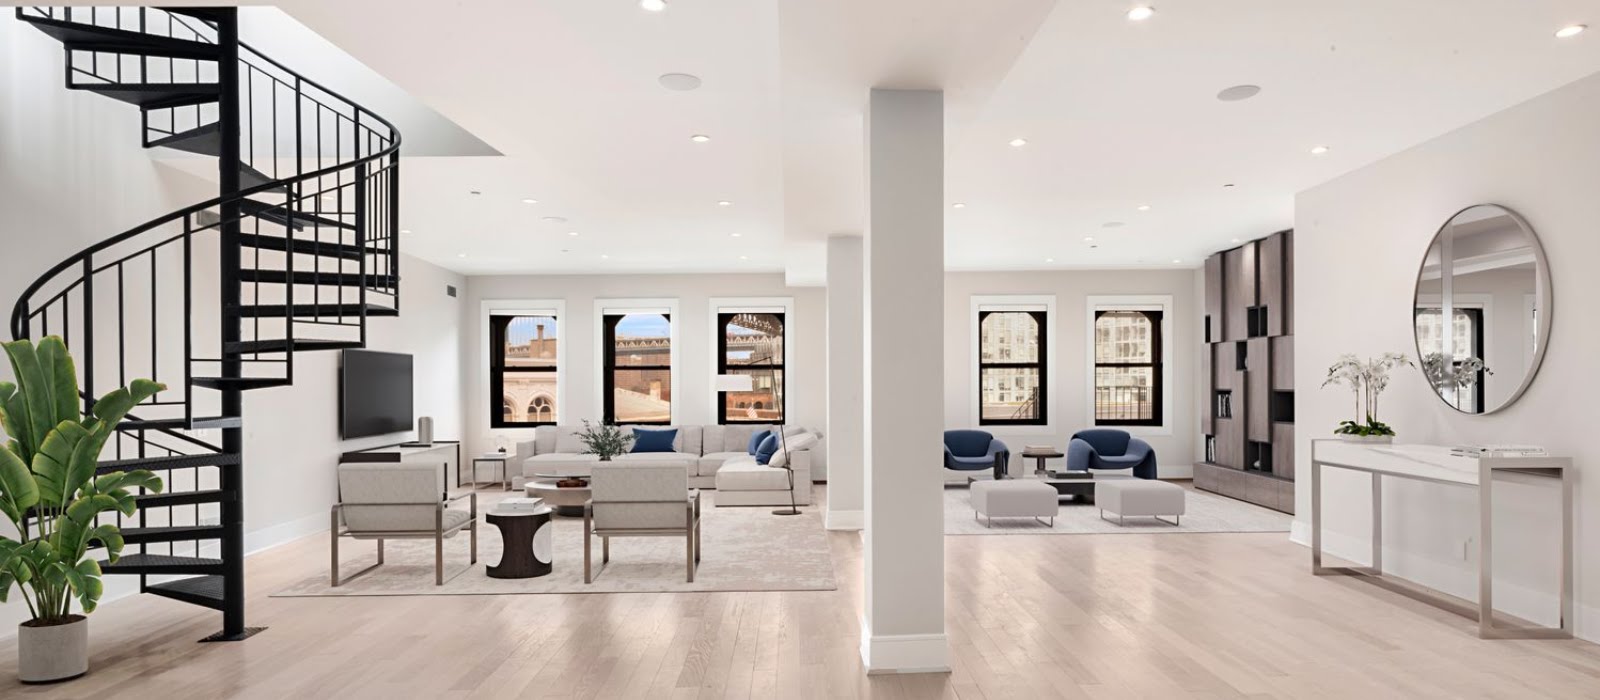 Pete Davidson’s Brooklyn Heights penthouse is back on the rental market — and it’s surprisingly chic